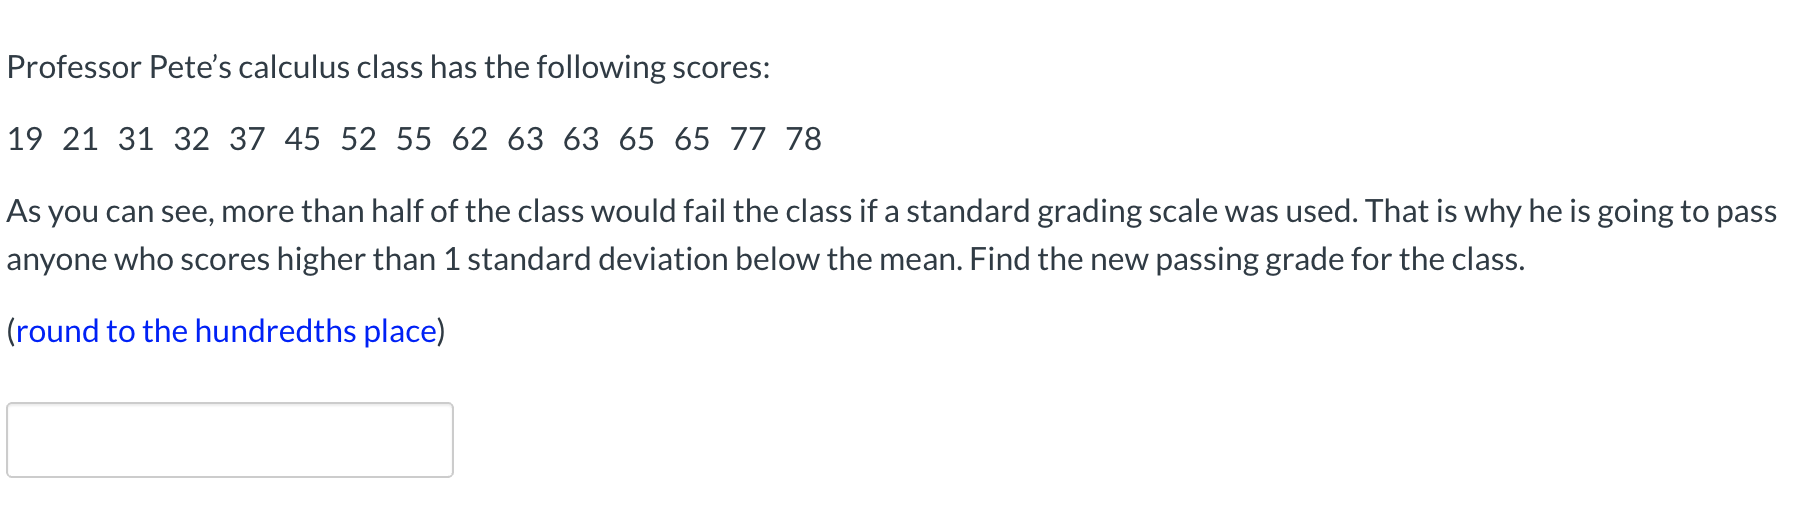 Professor Pete's calculus class has the following scores:
19 21 31 32 37 45 52 55 62 63 63 65 65 77 78
As you can see, more than half of the class would fail the class if a standard grading scale was used. That is why he is going to pass
anyone who scores higher than 1 standard deviation below the mean. Find the new passing grade for the class.
